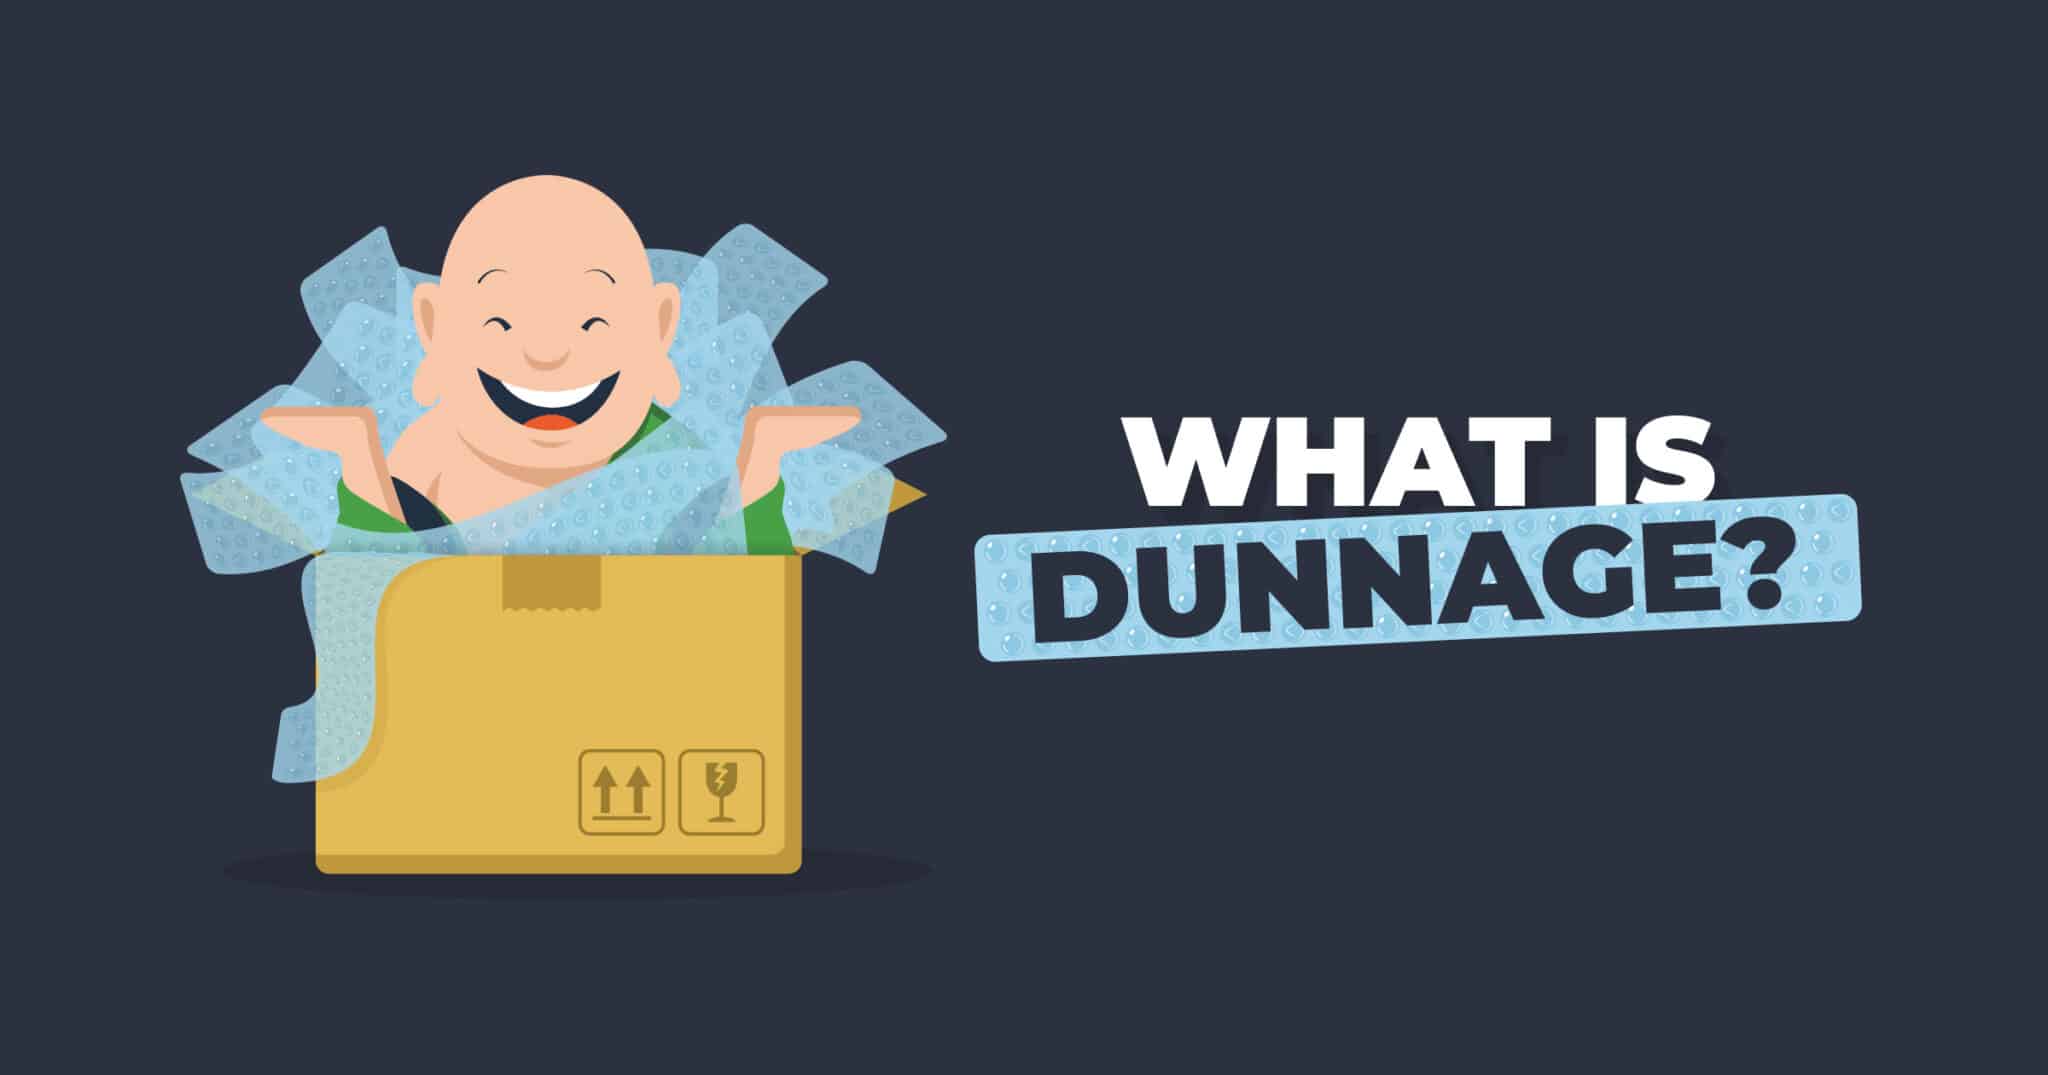 What is Dunnage?